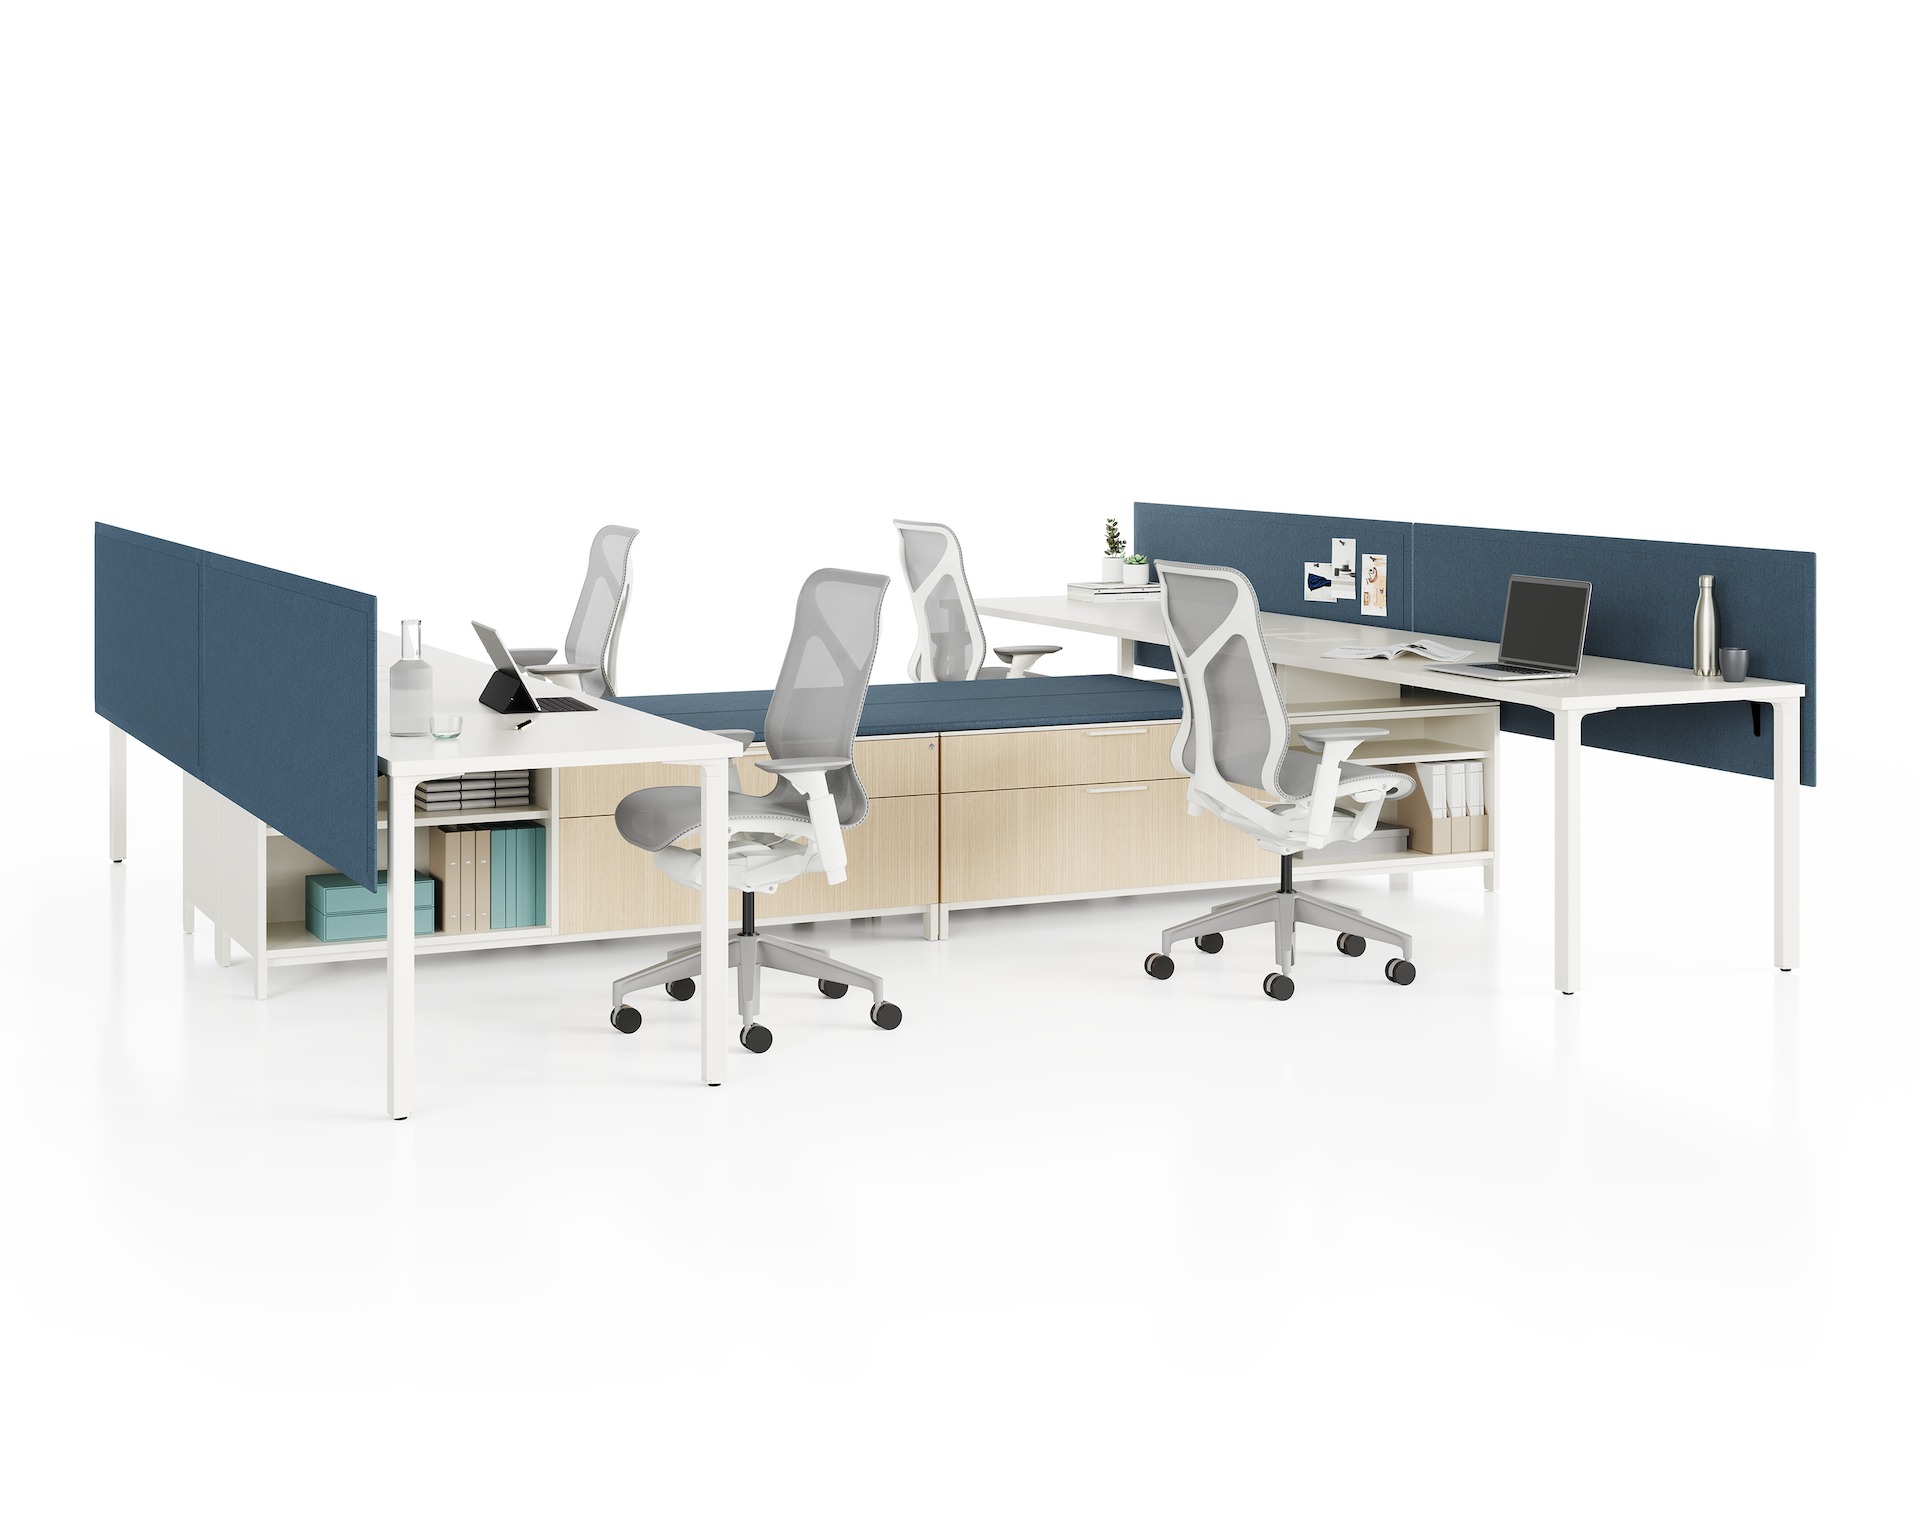 Group of four Canvas Storage workstations with white surfaces, blue screens, and grey Cosm Chairs.